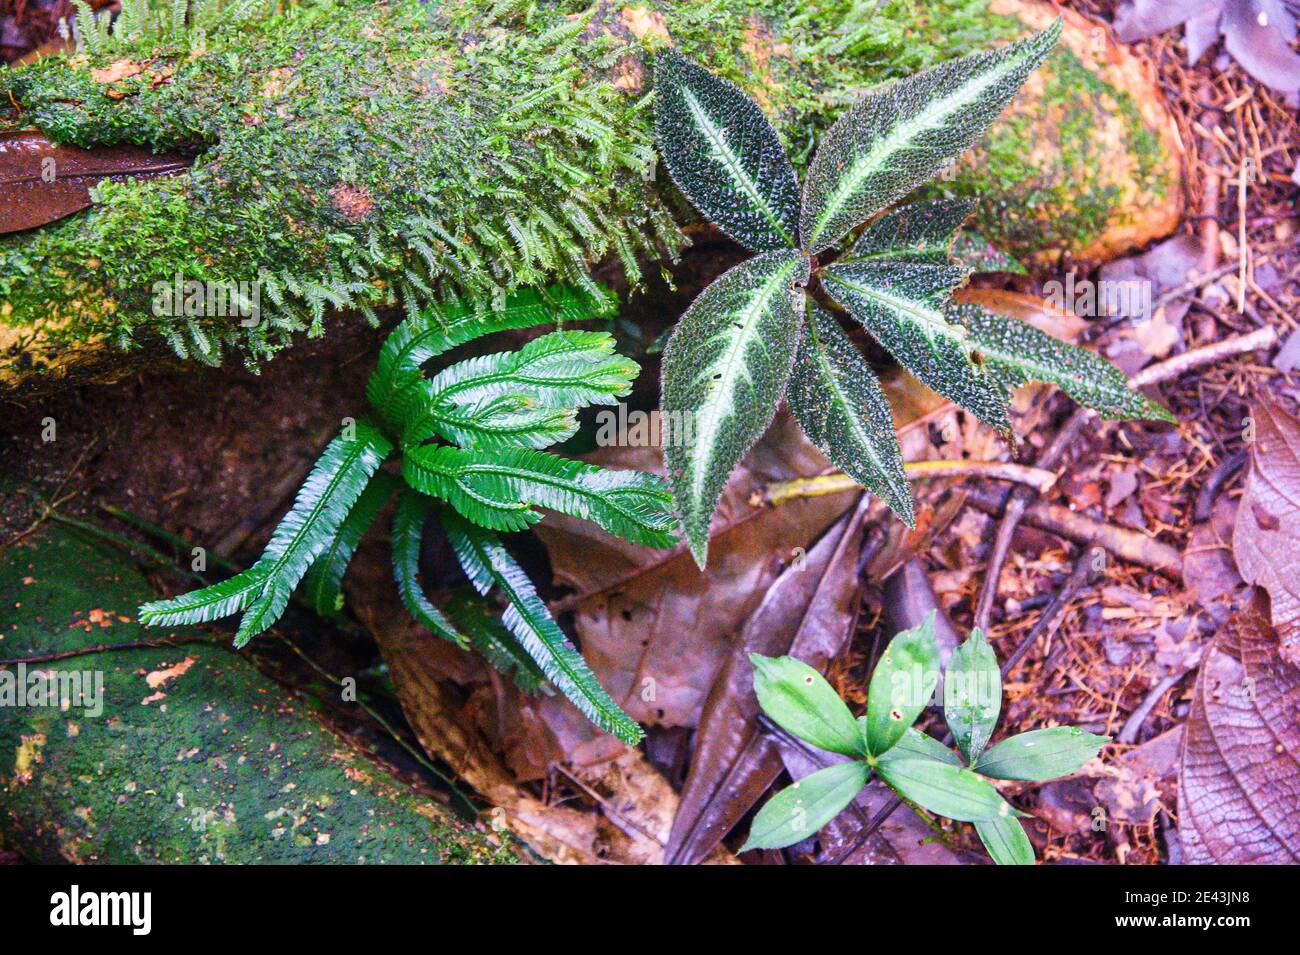 tropical plants growing on a log in the rainforest Stock Photo